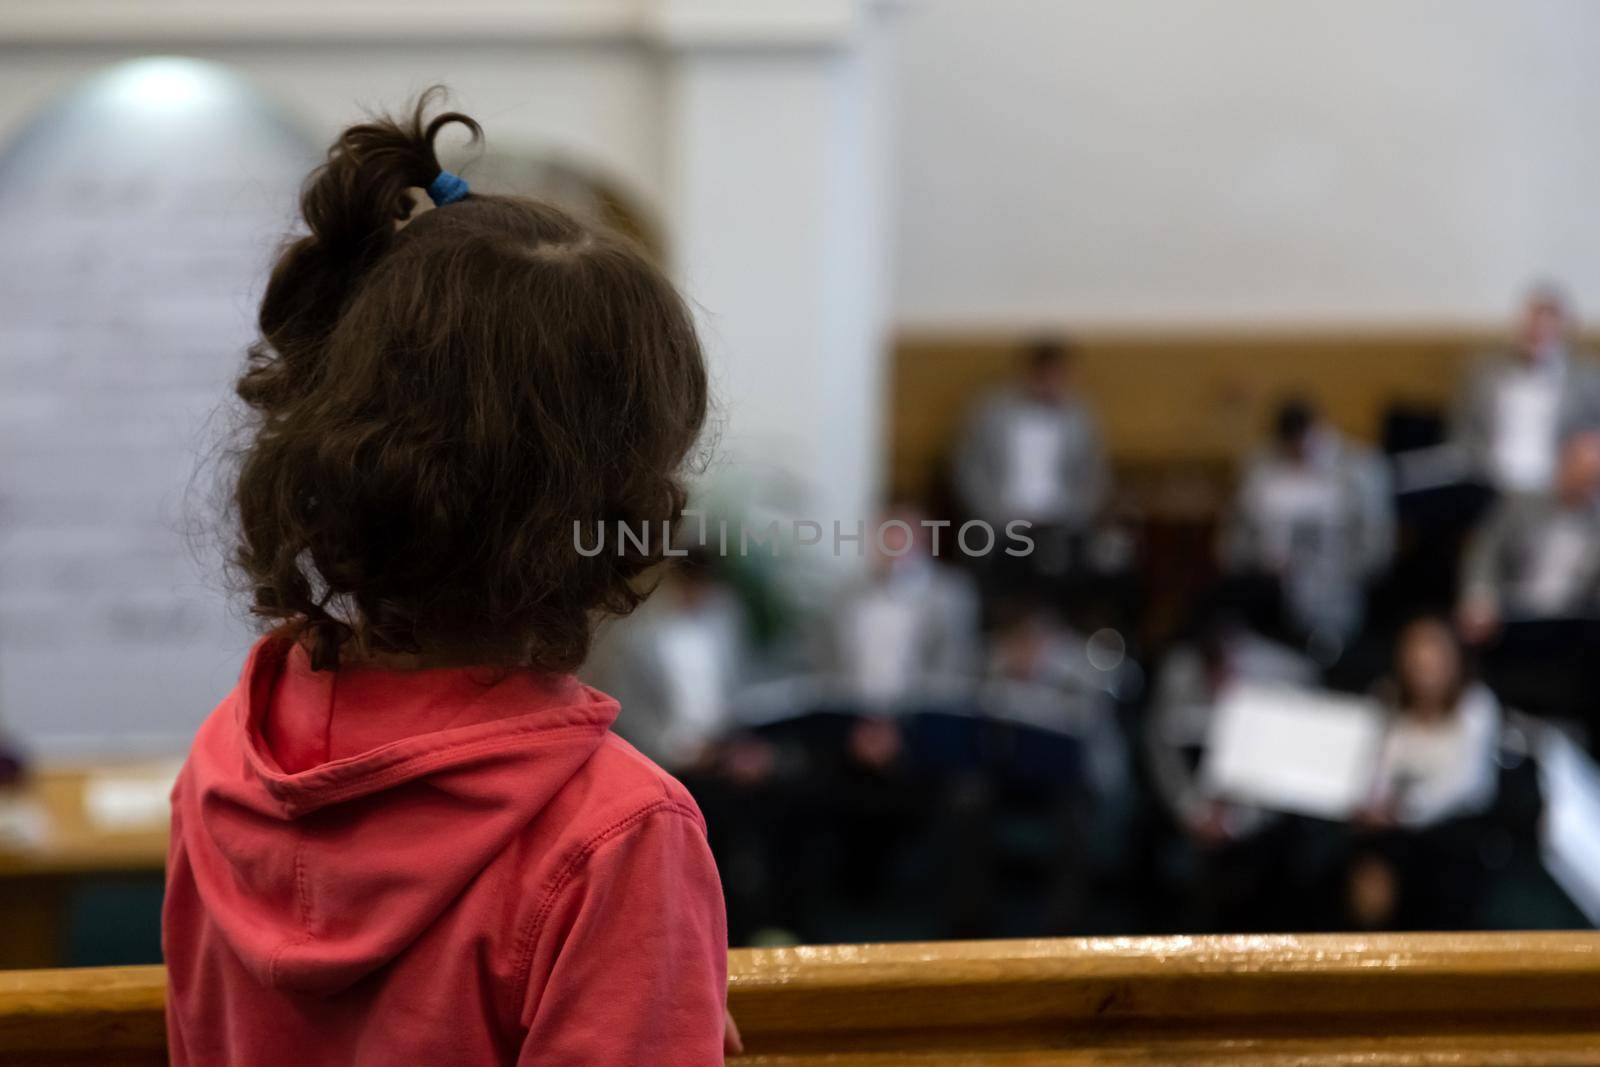 A view from the back of a little girl in a red sweater, who is looking at an orchestra that is out of focus